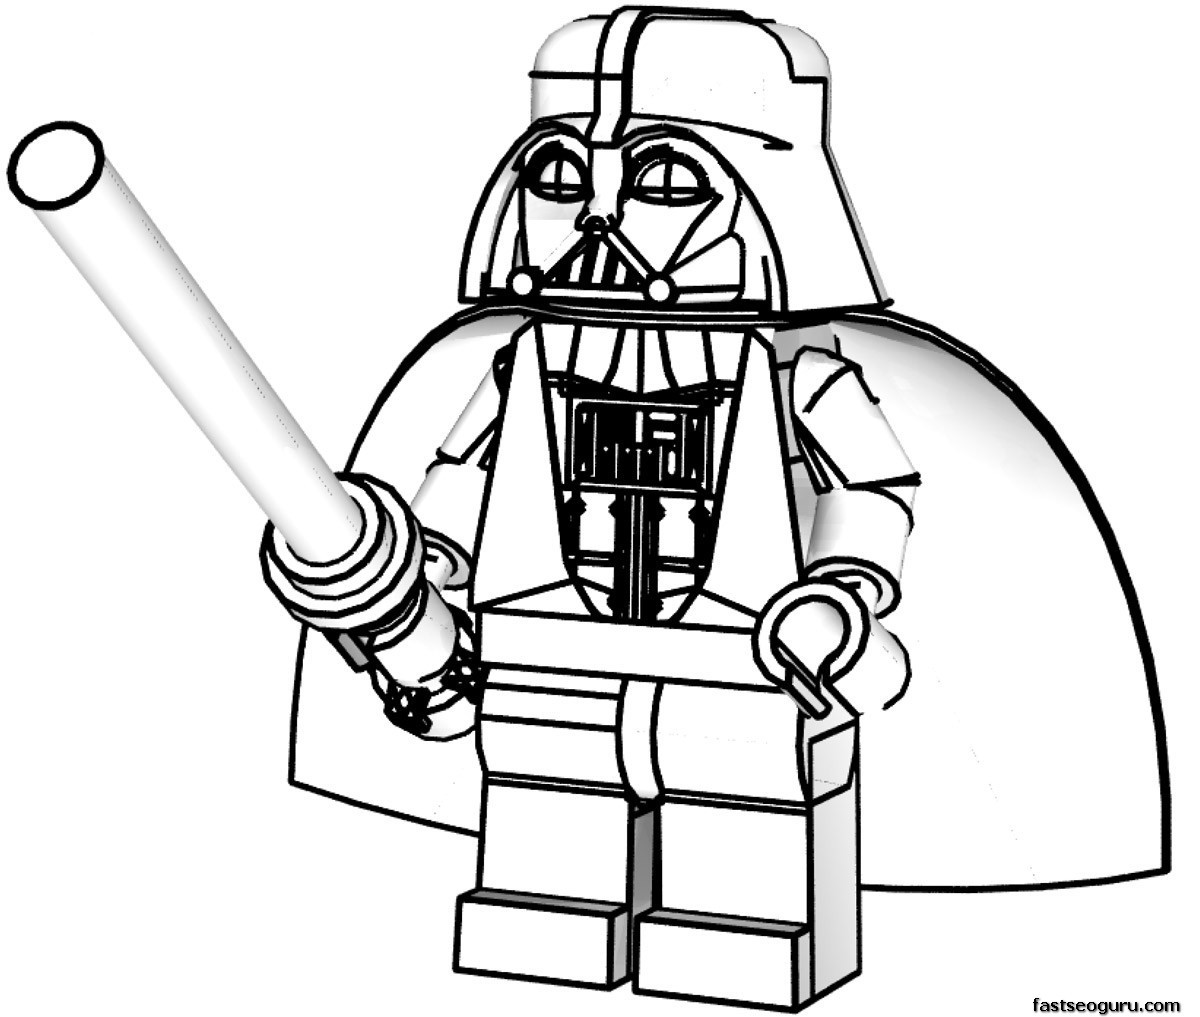 Lego Star Wars Coloring Pages To Print
 Lego Star Wars Luke Skywalker Coloring Page Free Printable